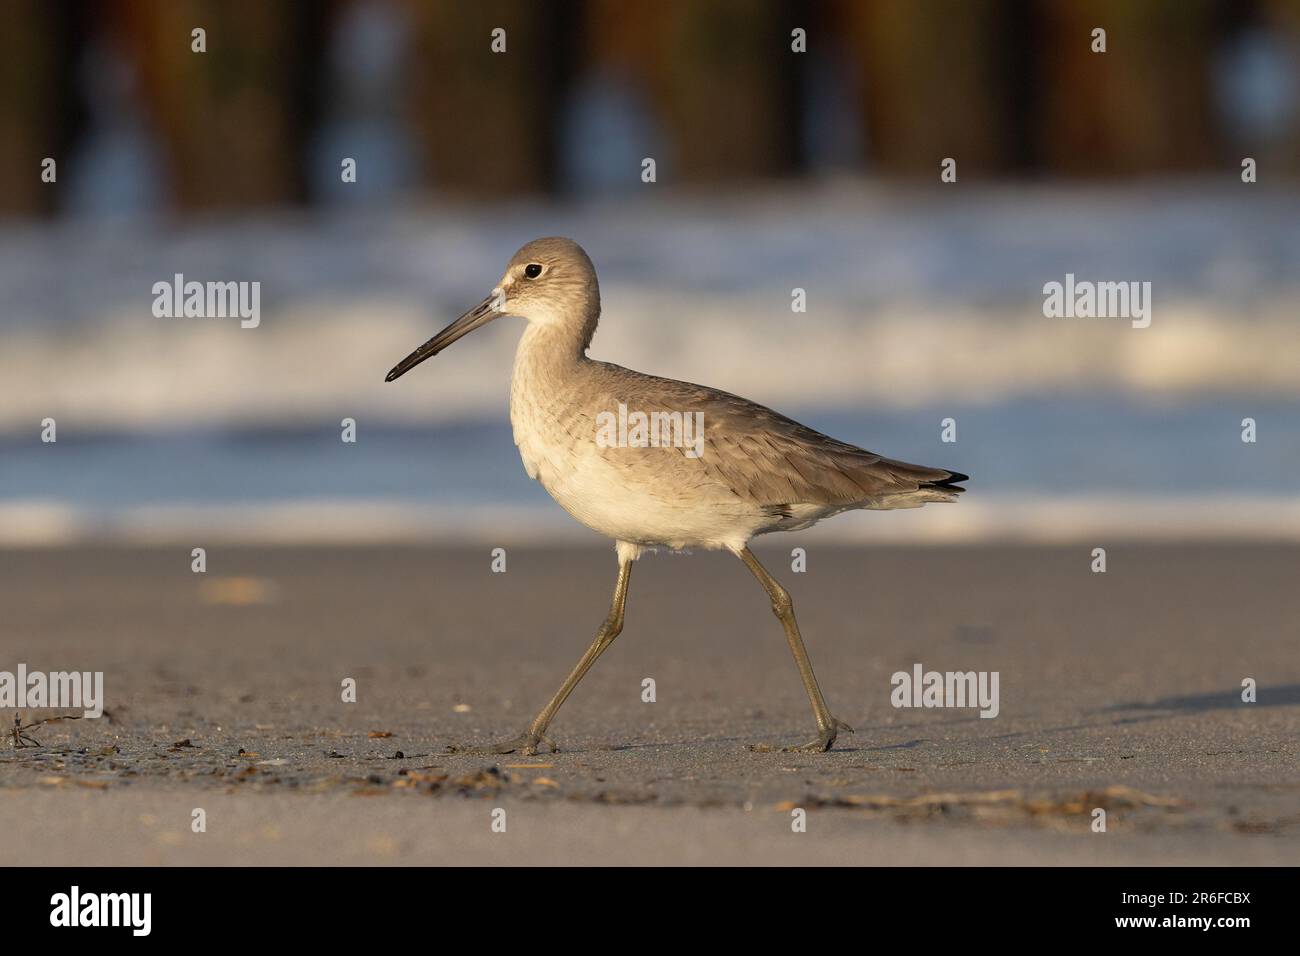 single willet on the beach near the waves Stock Photo